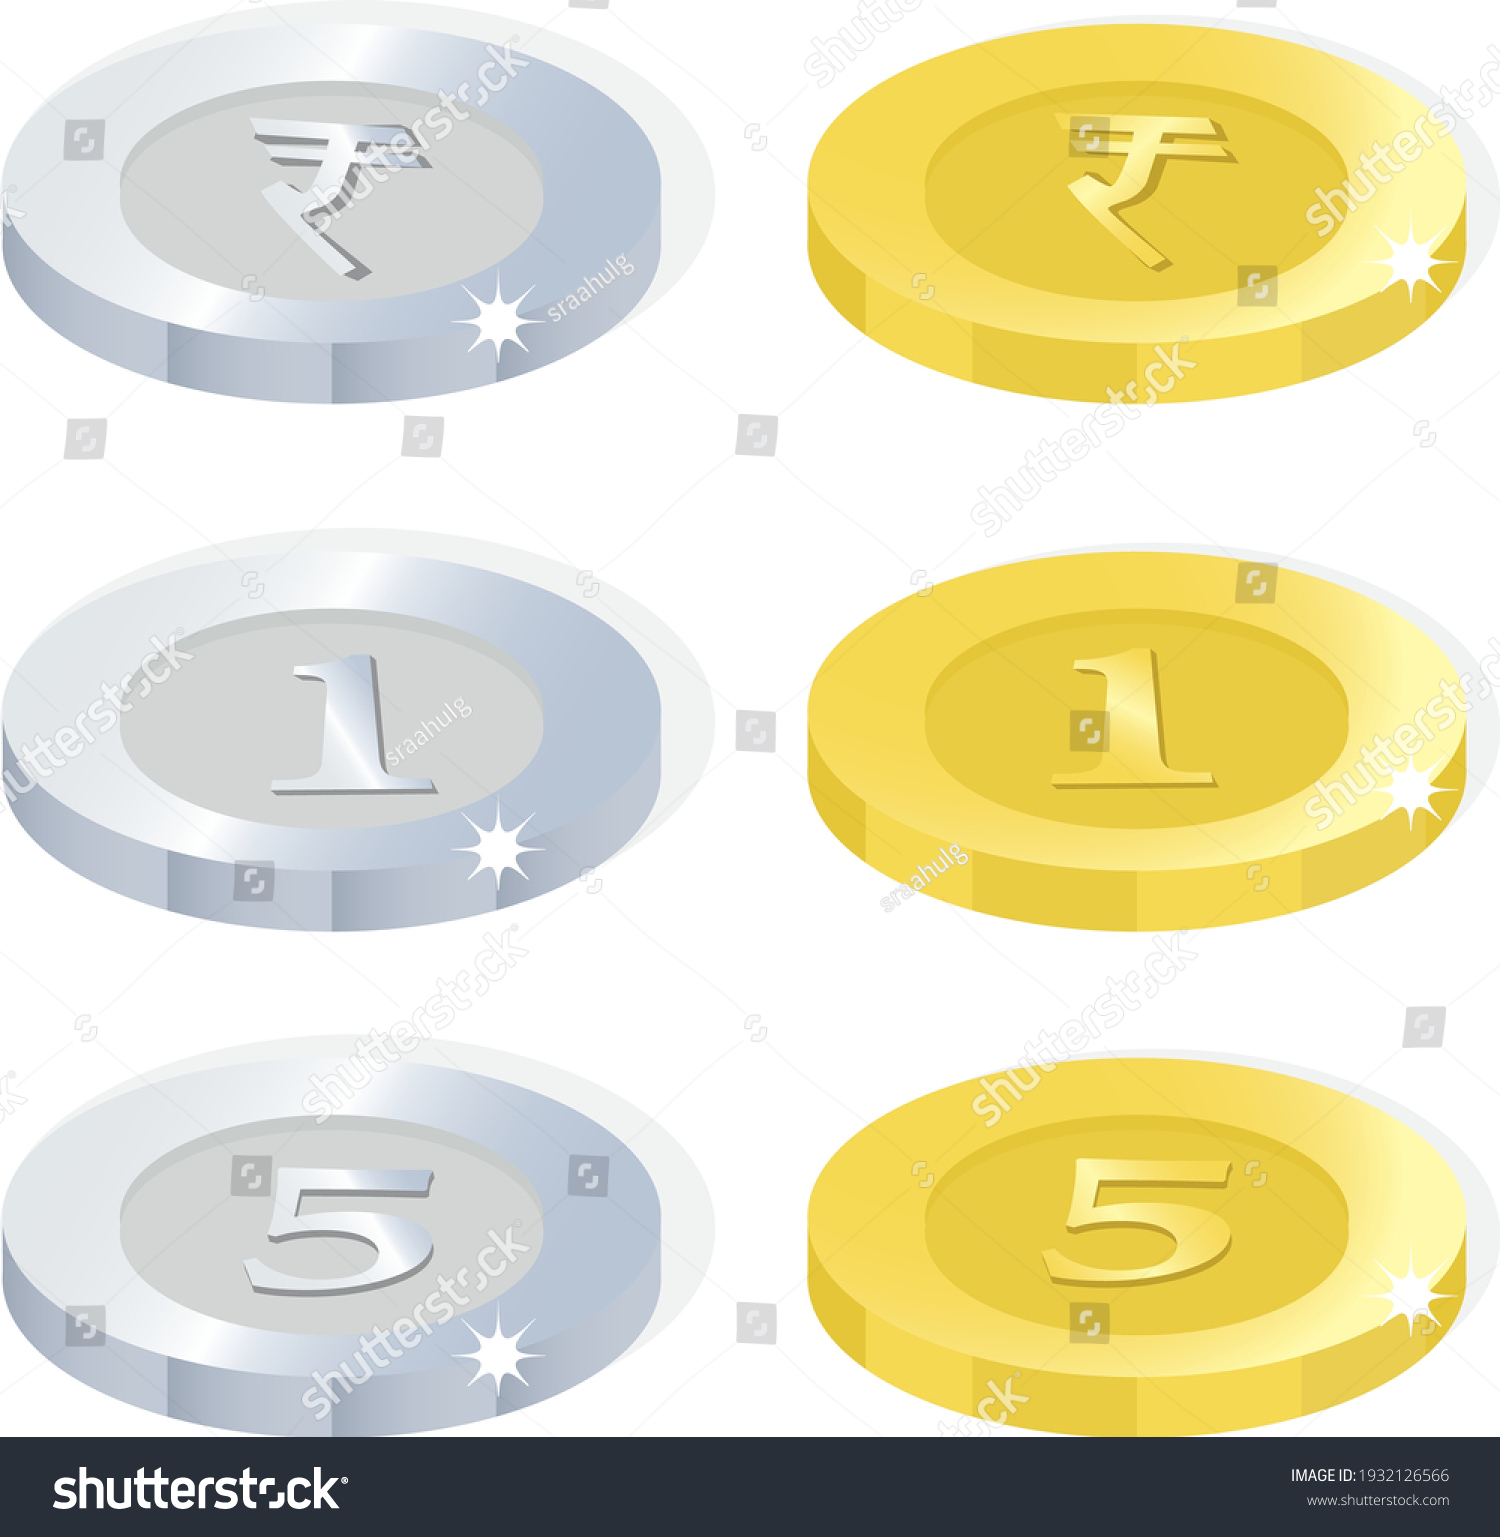 SVG of gold and silver coin isolated vector svg